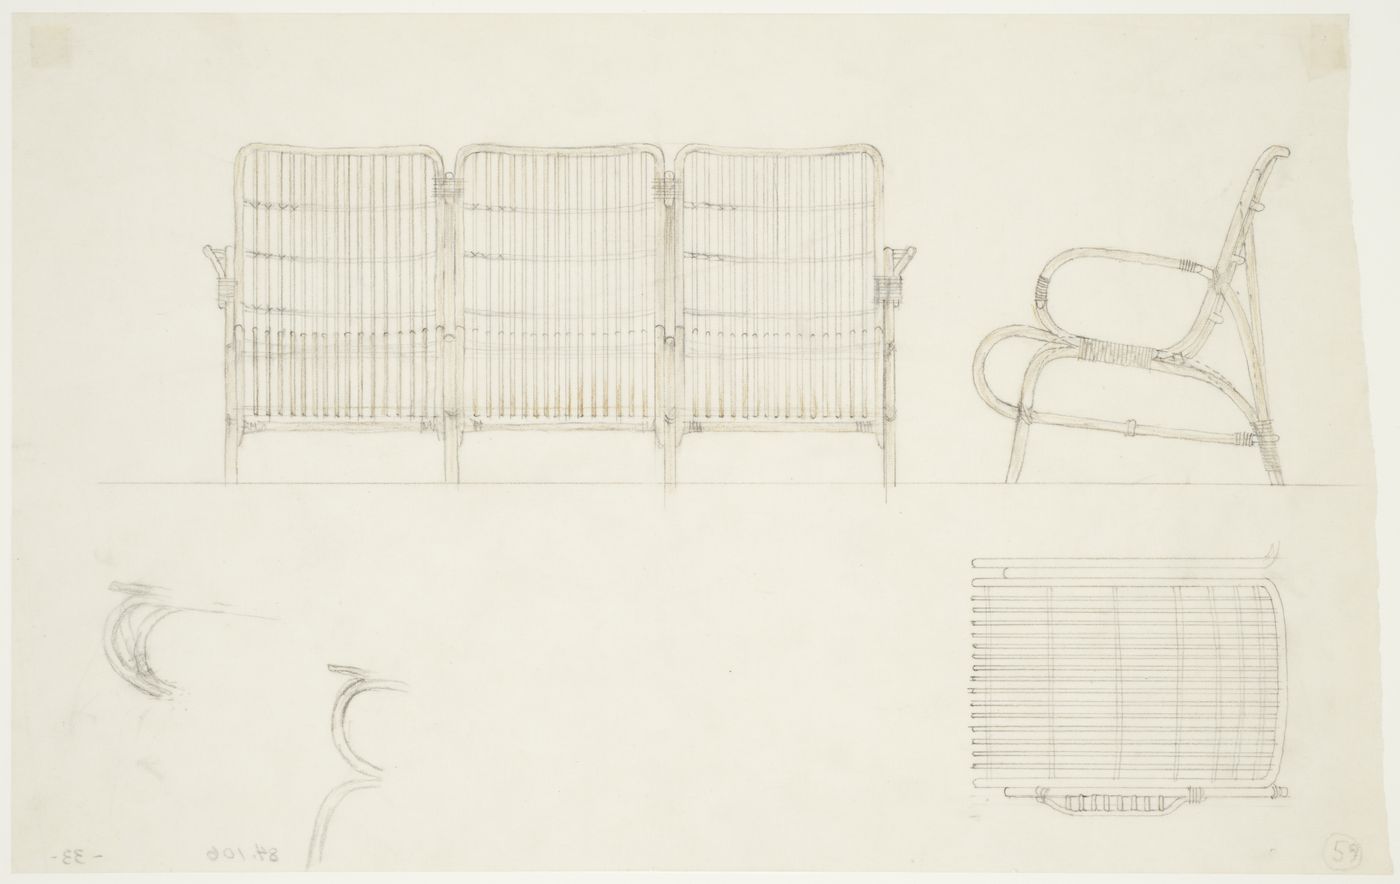 Elevations, a plan and details for three cane chairs, Göteborgs rådhusets tillbyggnad [courthouse annex], Göteborg, Sweden